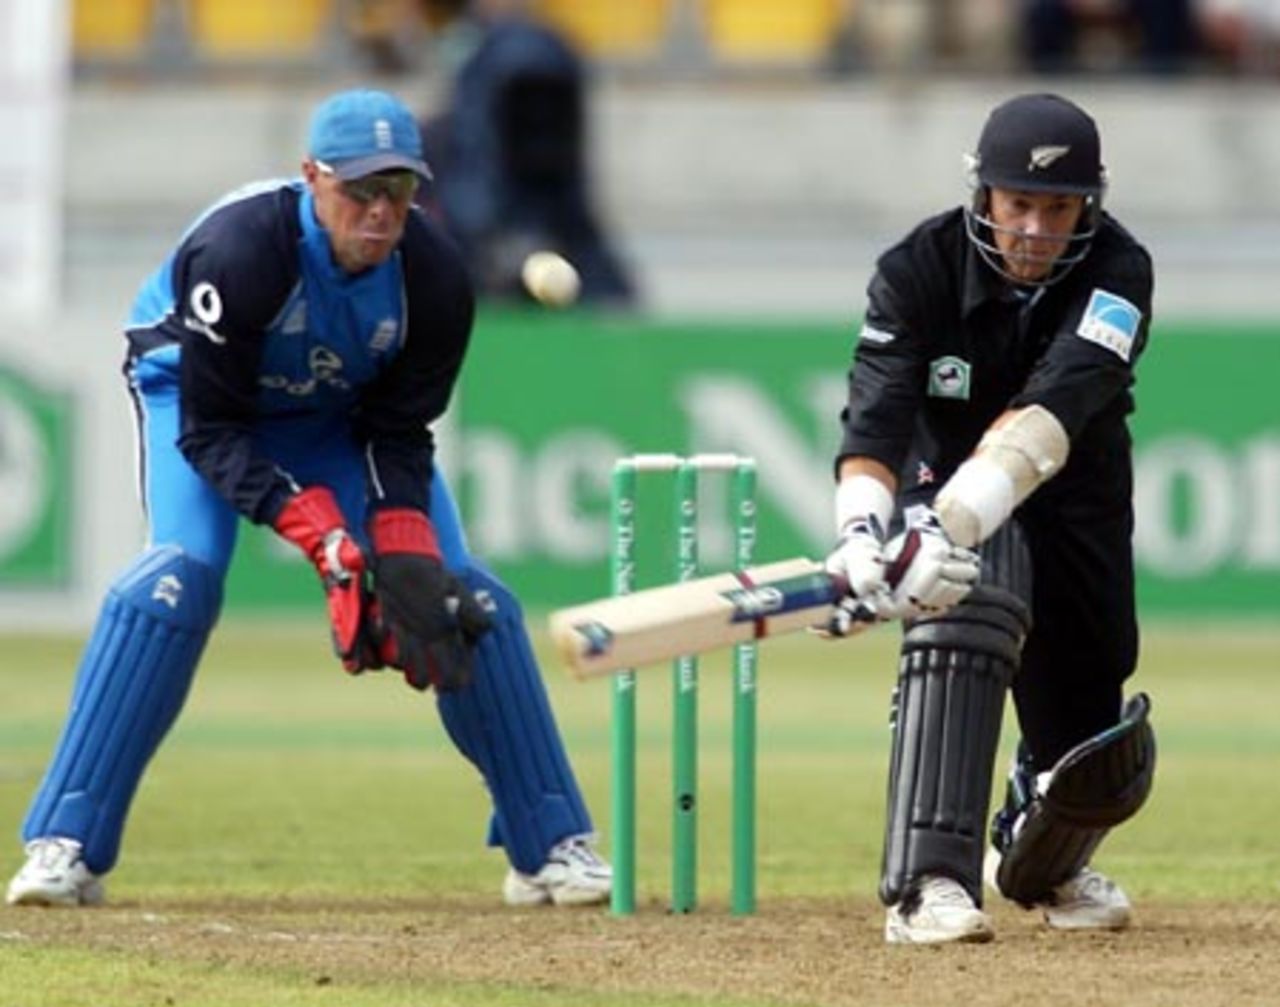 New Zealand batsman Craig McMillan plays a reverse sweep during his innings of 69. England wicket-keeper Marcus Trescothick looks on. 2nd ODI: New Zealand v England at WestpacTrust Stadium, Wellington, 16 February 2002.